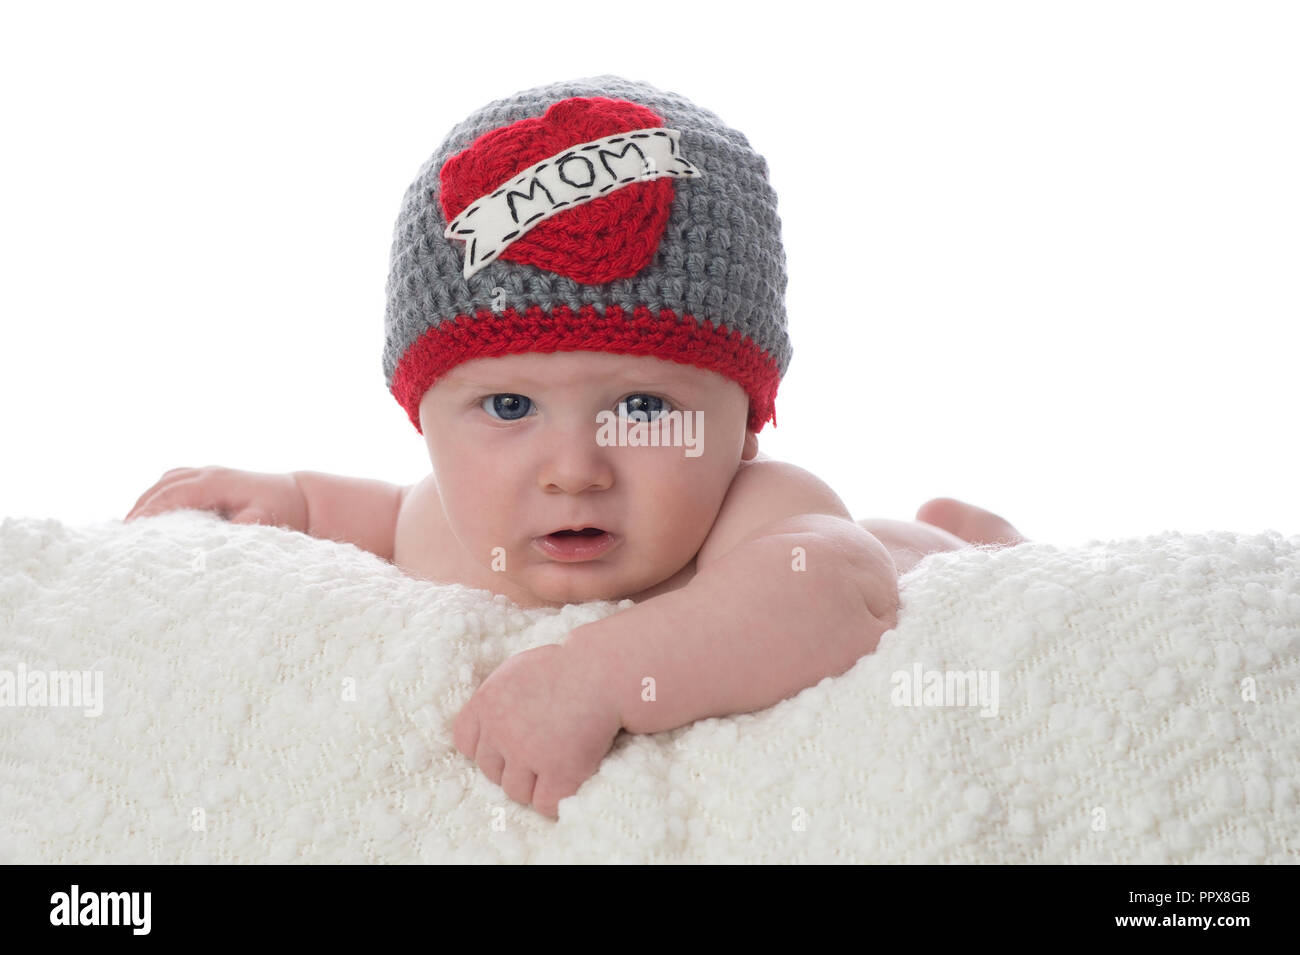 A 2 month old baby boy lying on his stomach on a white blanket. He is wearing a crocheted hat that says, 'Mom' on it. Shot in the studio on a white ba Stock Photo